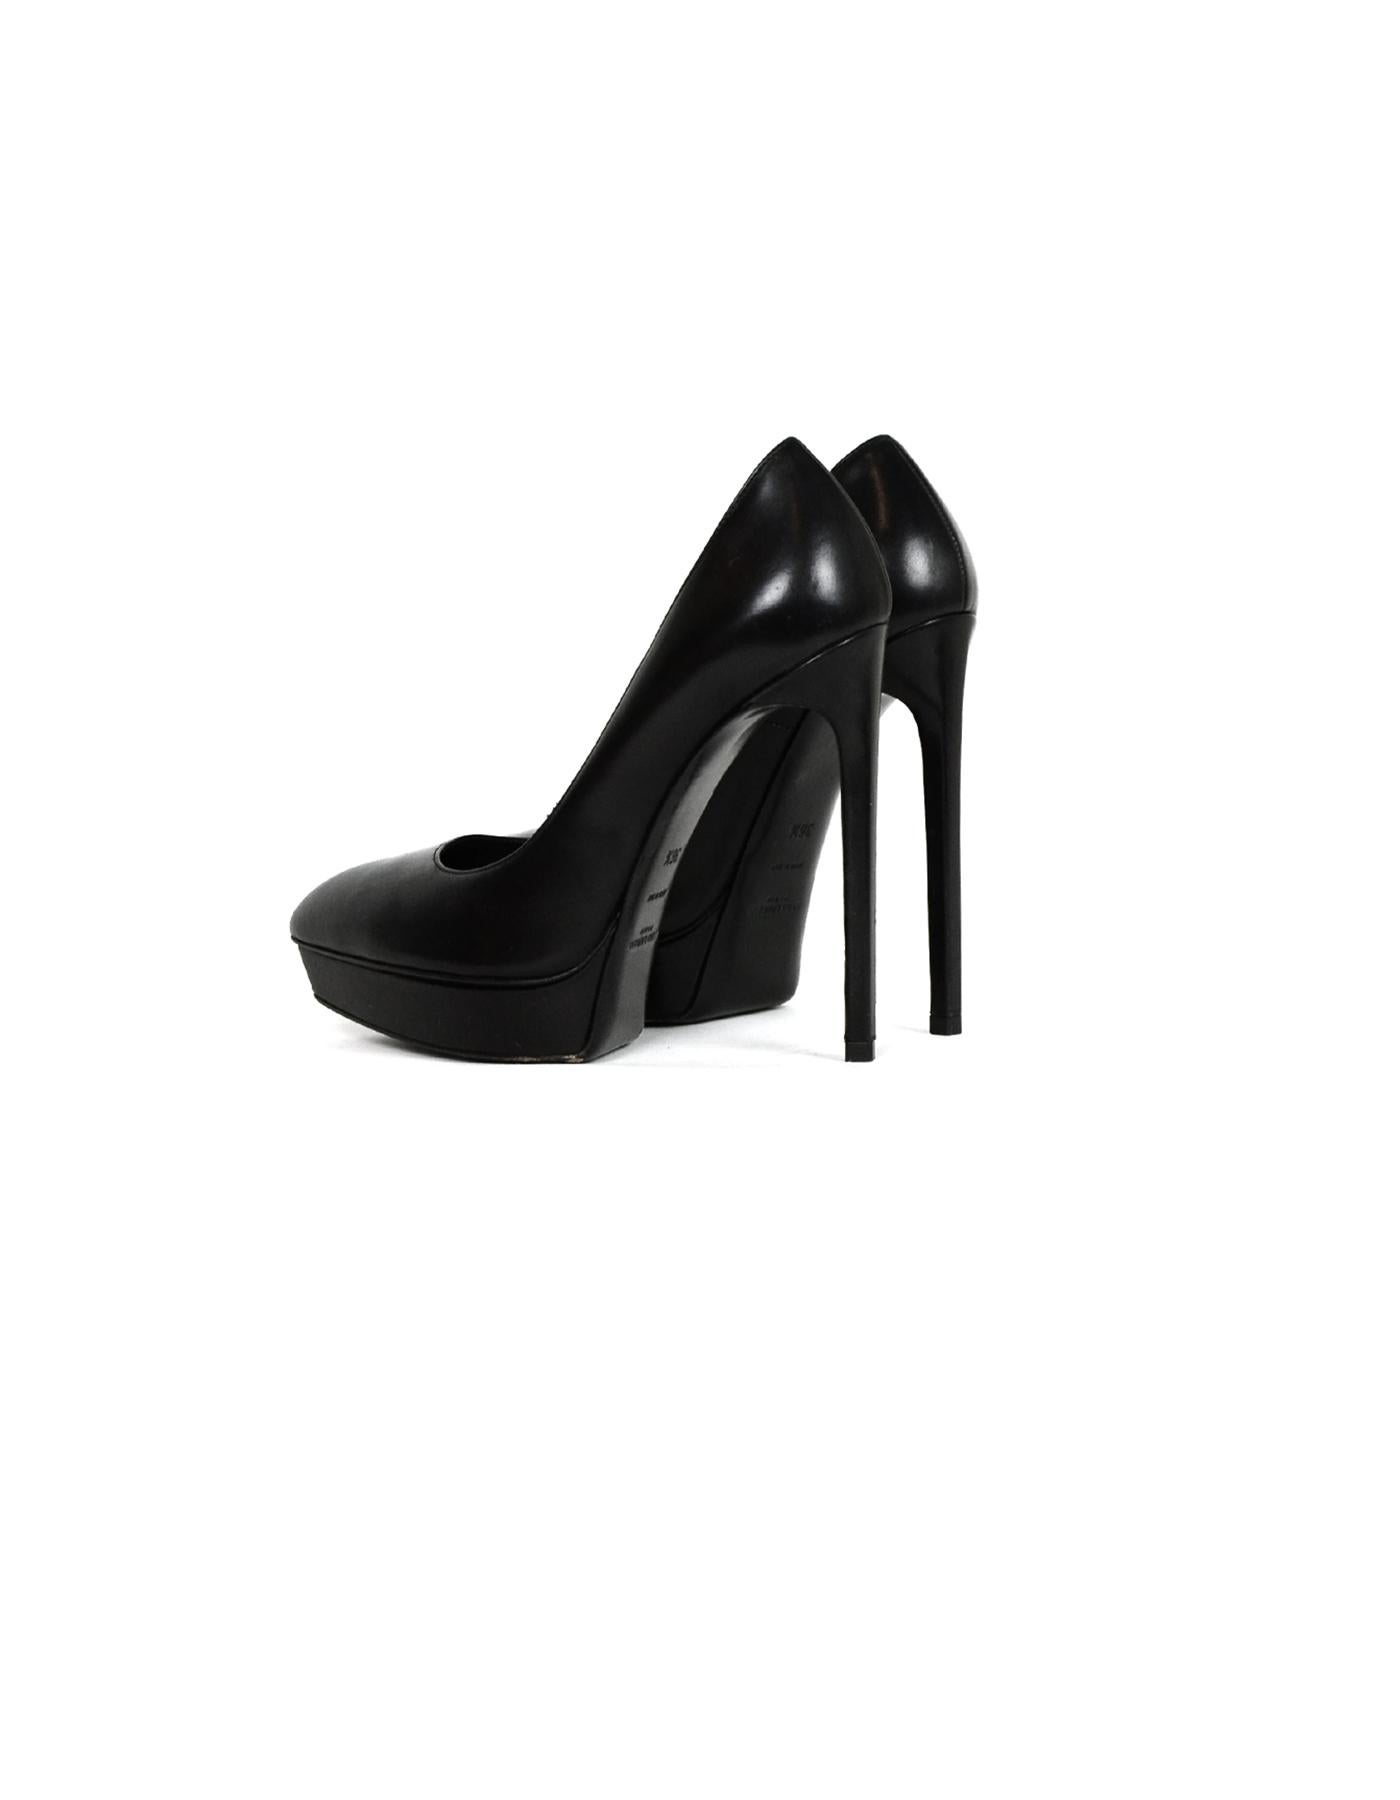 Saint Laurent Black Leather Janice 105mm Pumps sz 36.5 In Excellent Condition In New York, NY